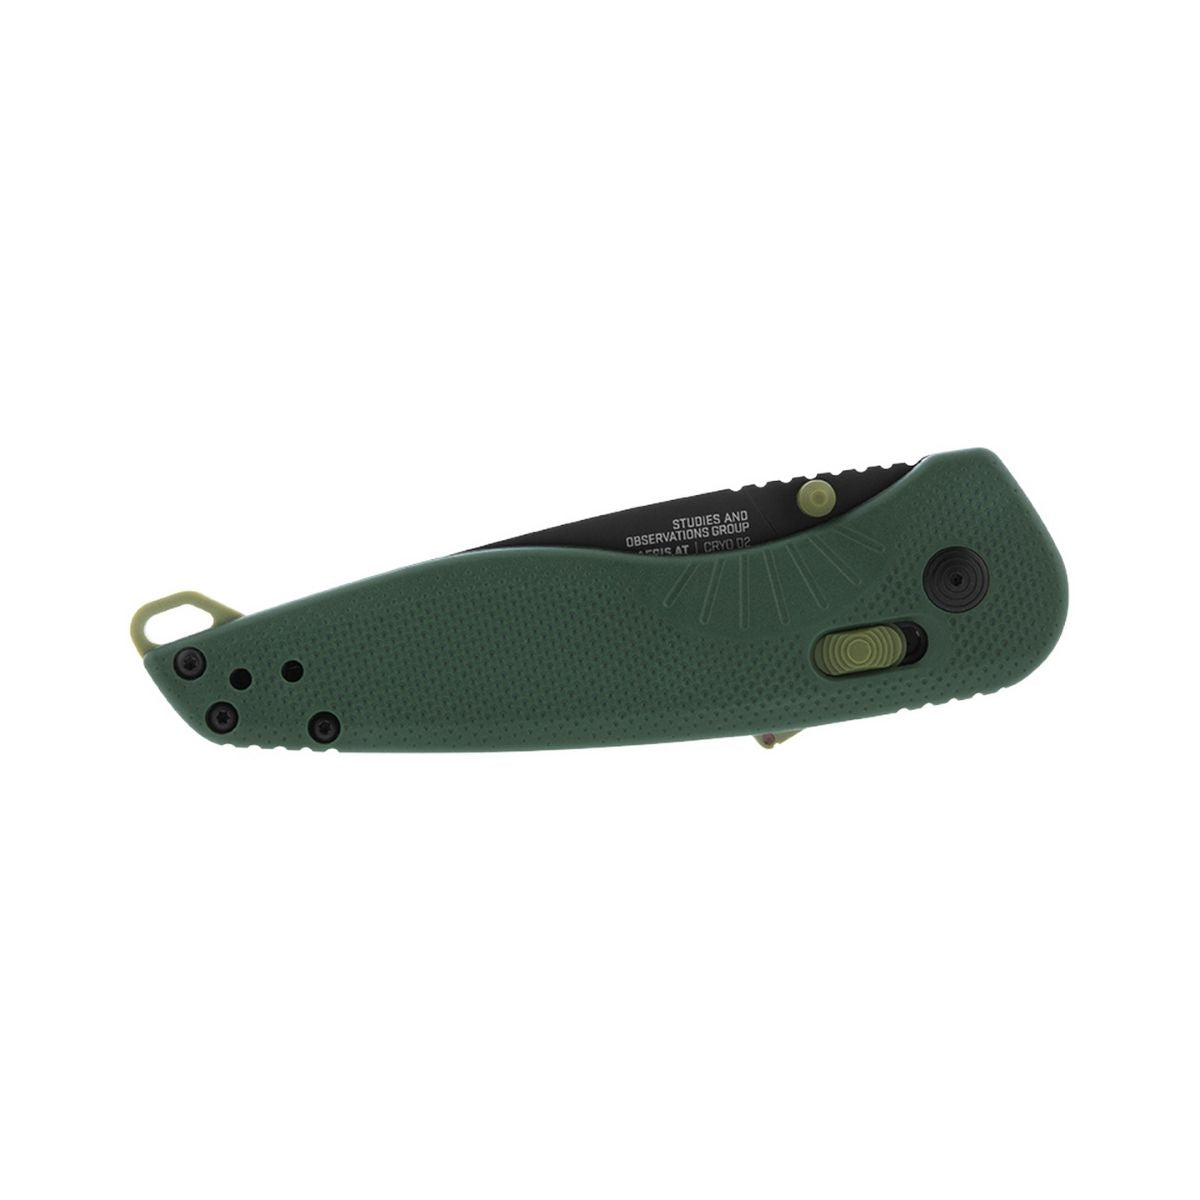 SOG Aegis AT Folding Knife - Forest & Moss - 11-41-04-57 - Outdoor Travel Gear 5